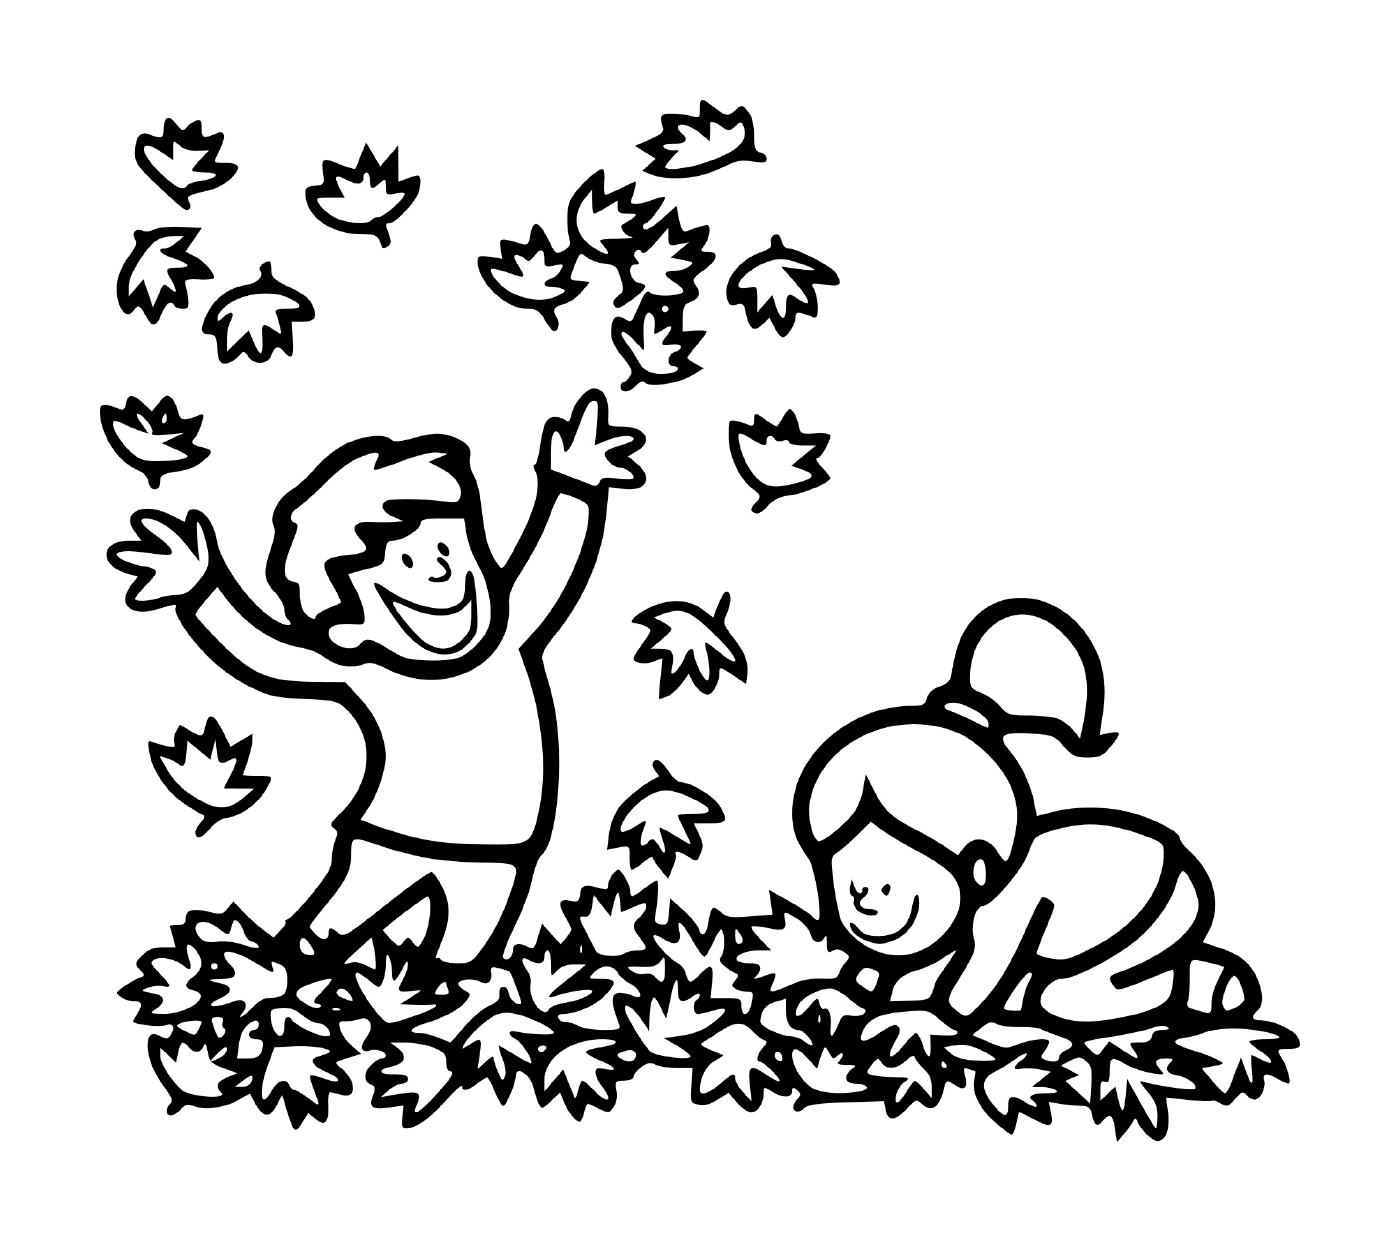  A boy and a girl playing in the leaves 